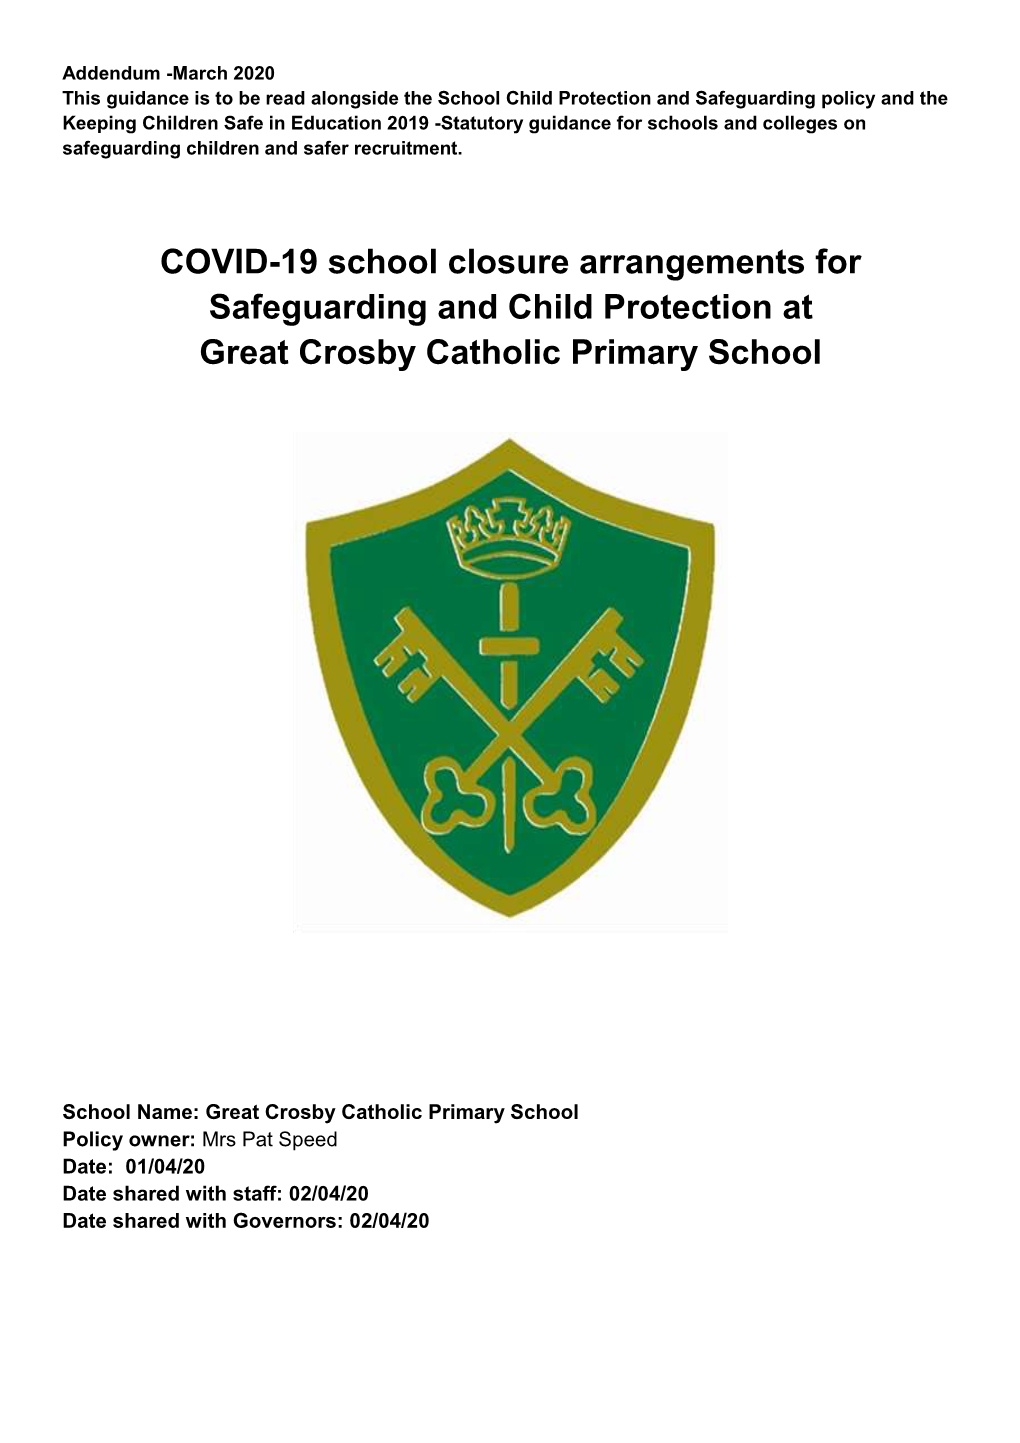 COVID-19 School Closure Arrangements for Safeguarding and Child Protection at Great Crosby Catholic Primary School